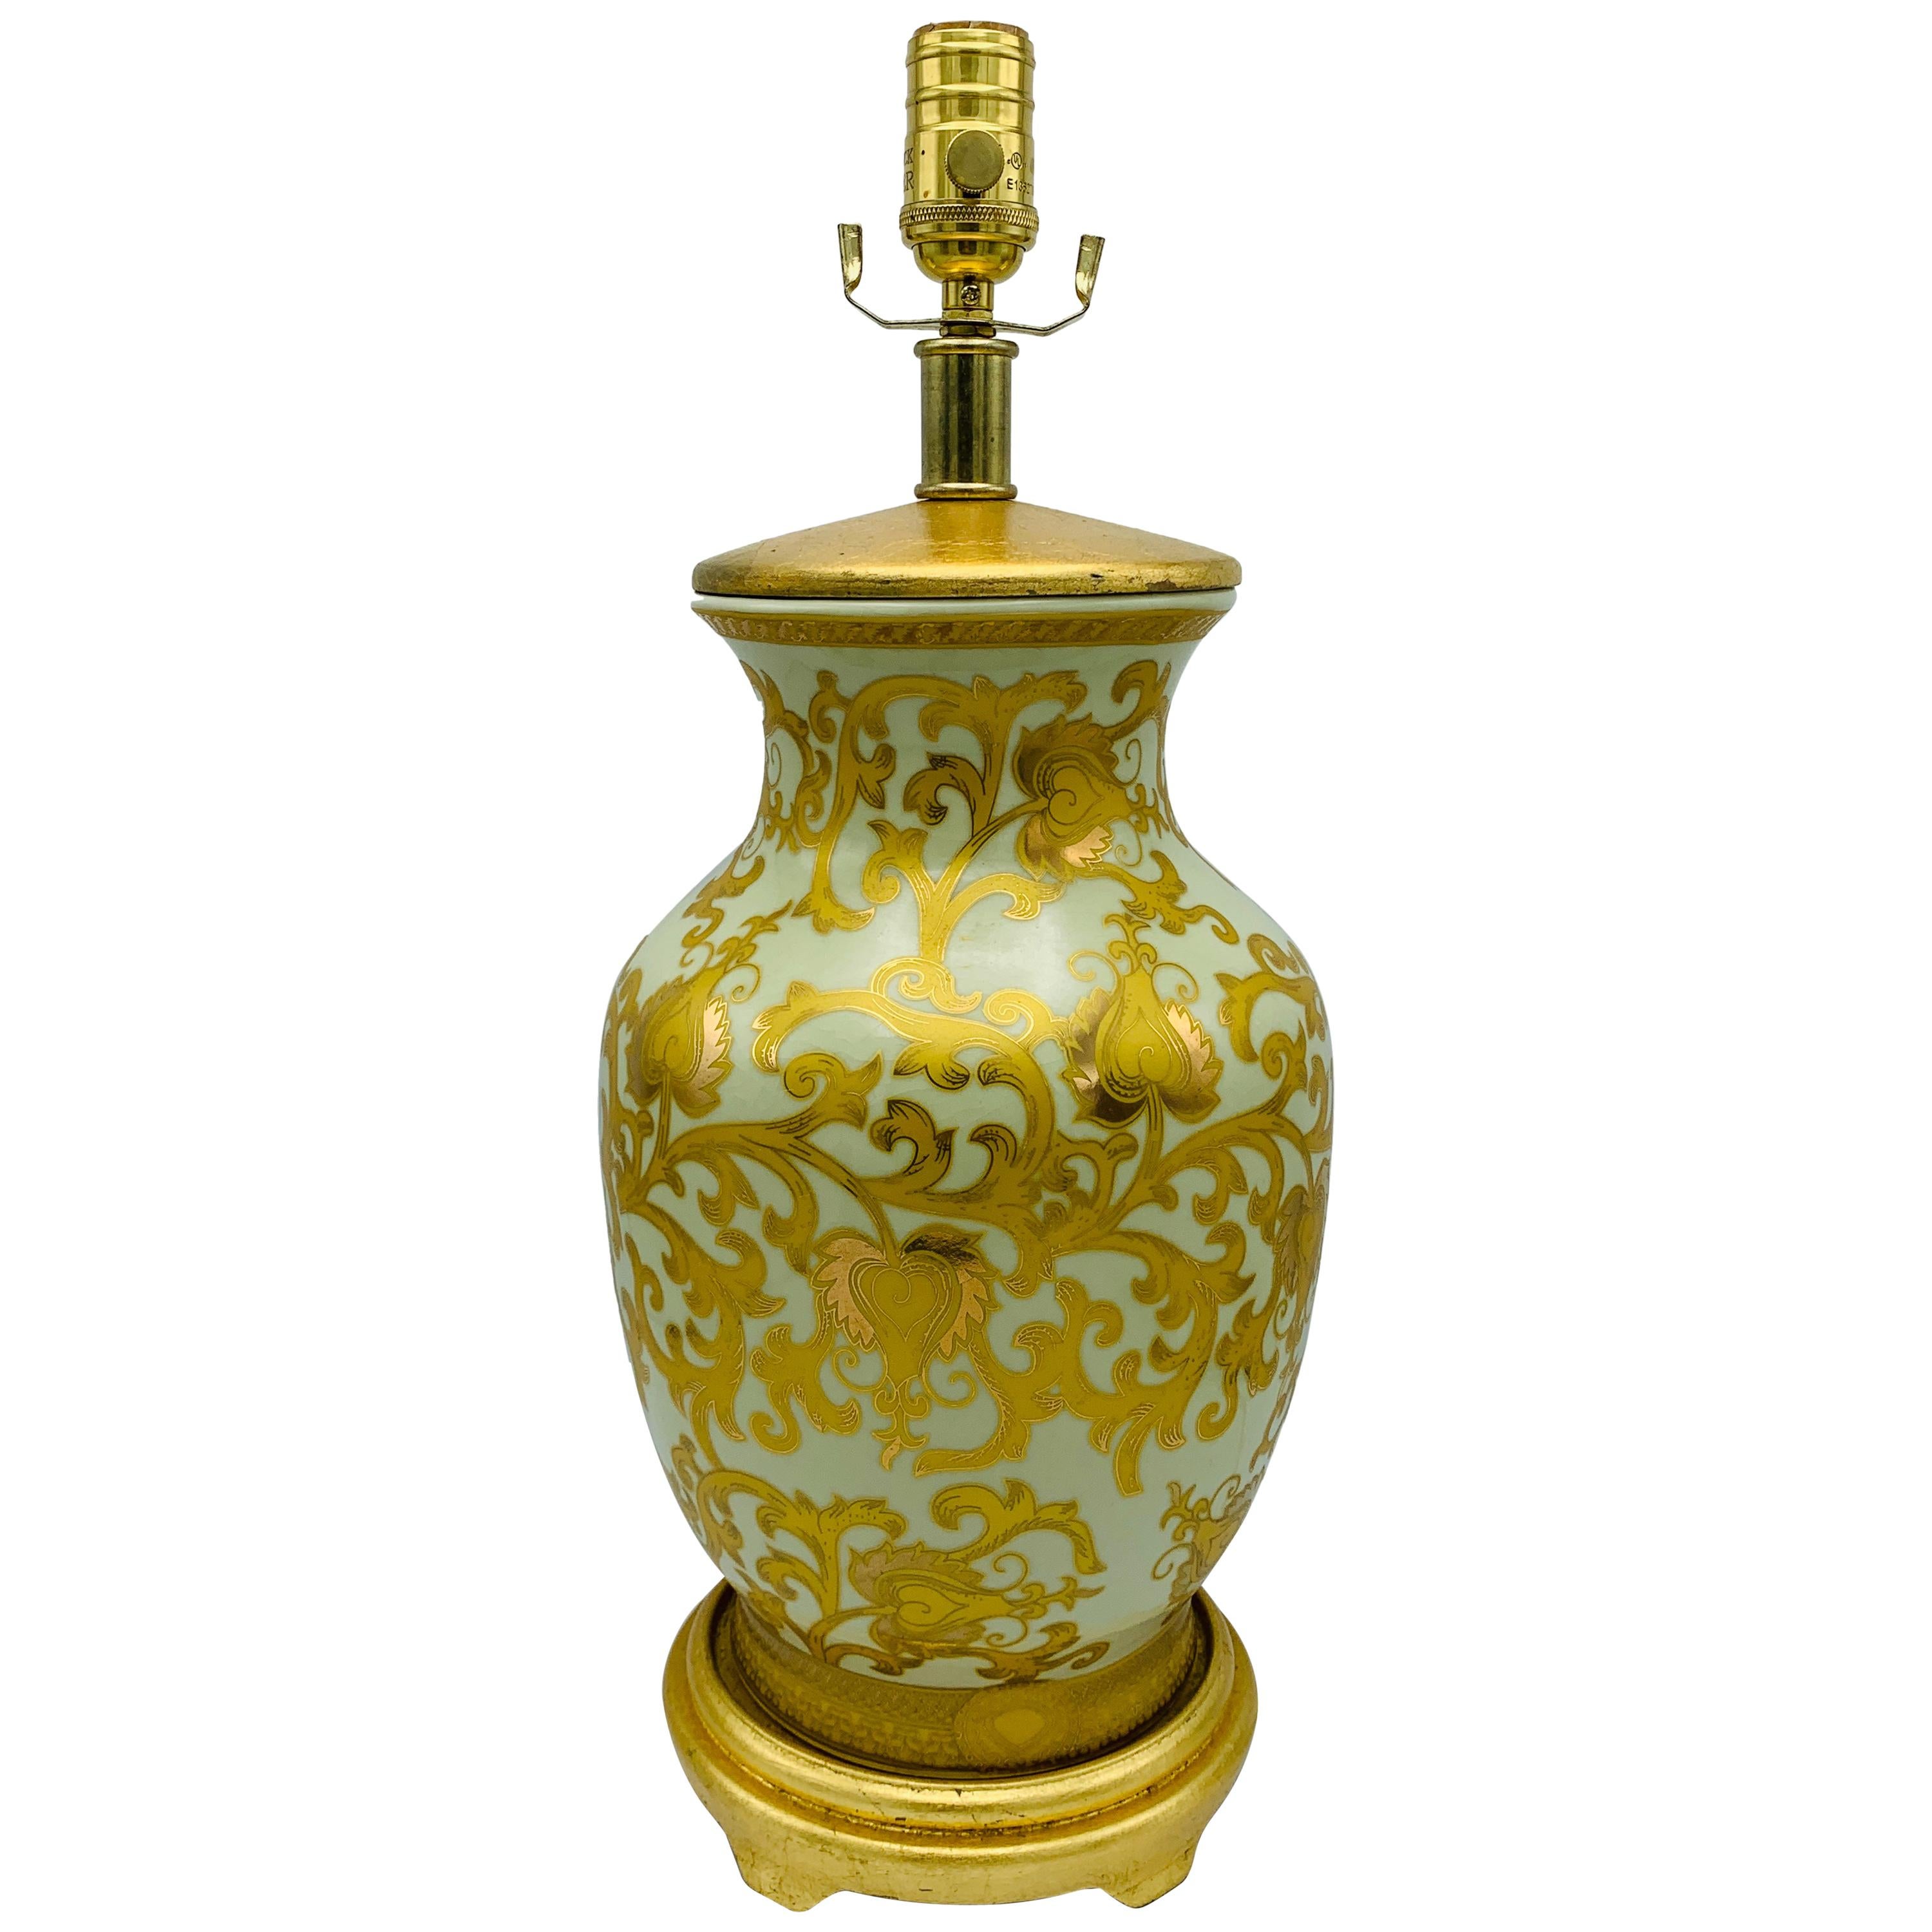 1980s Frederick Cooper Gold Damask Urn Lamp with Gilt Detailing For Sale